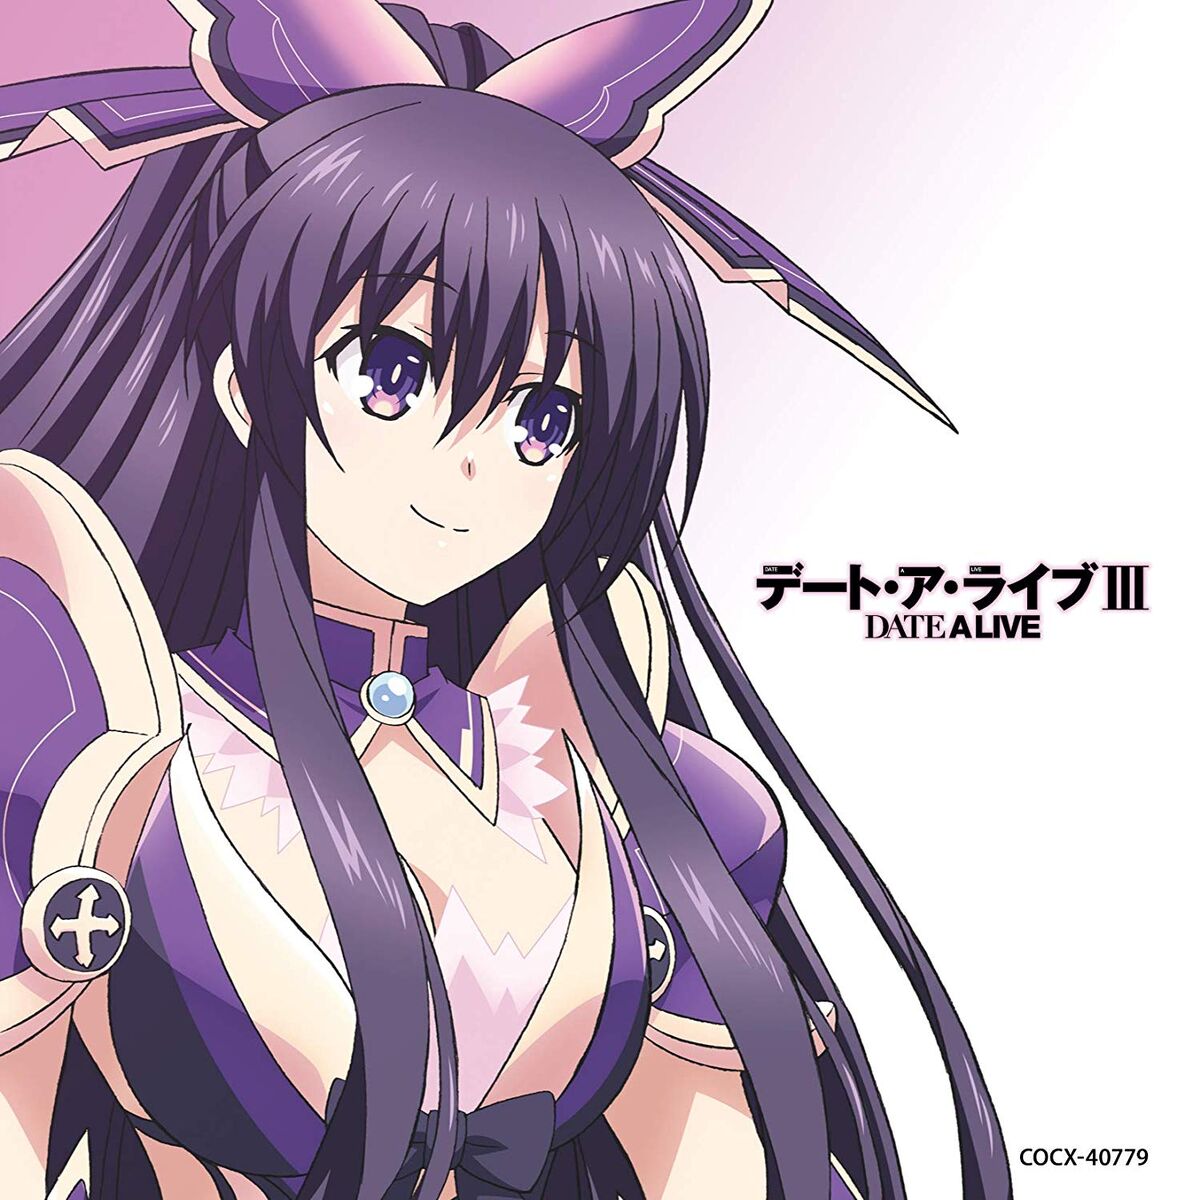 Date A Live (song), Date A Live Wiki